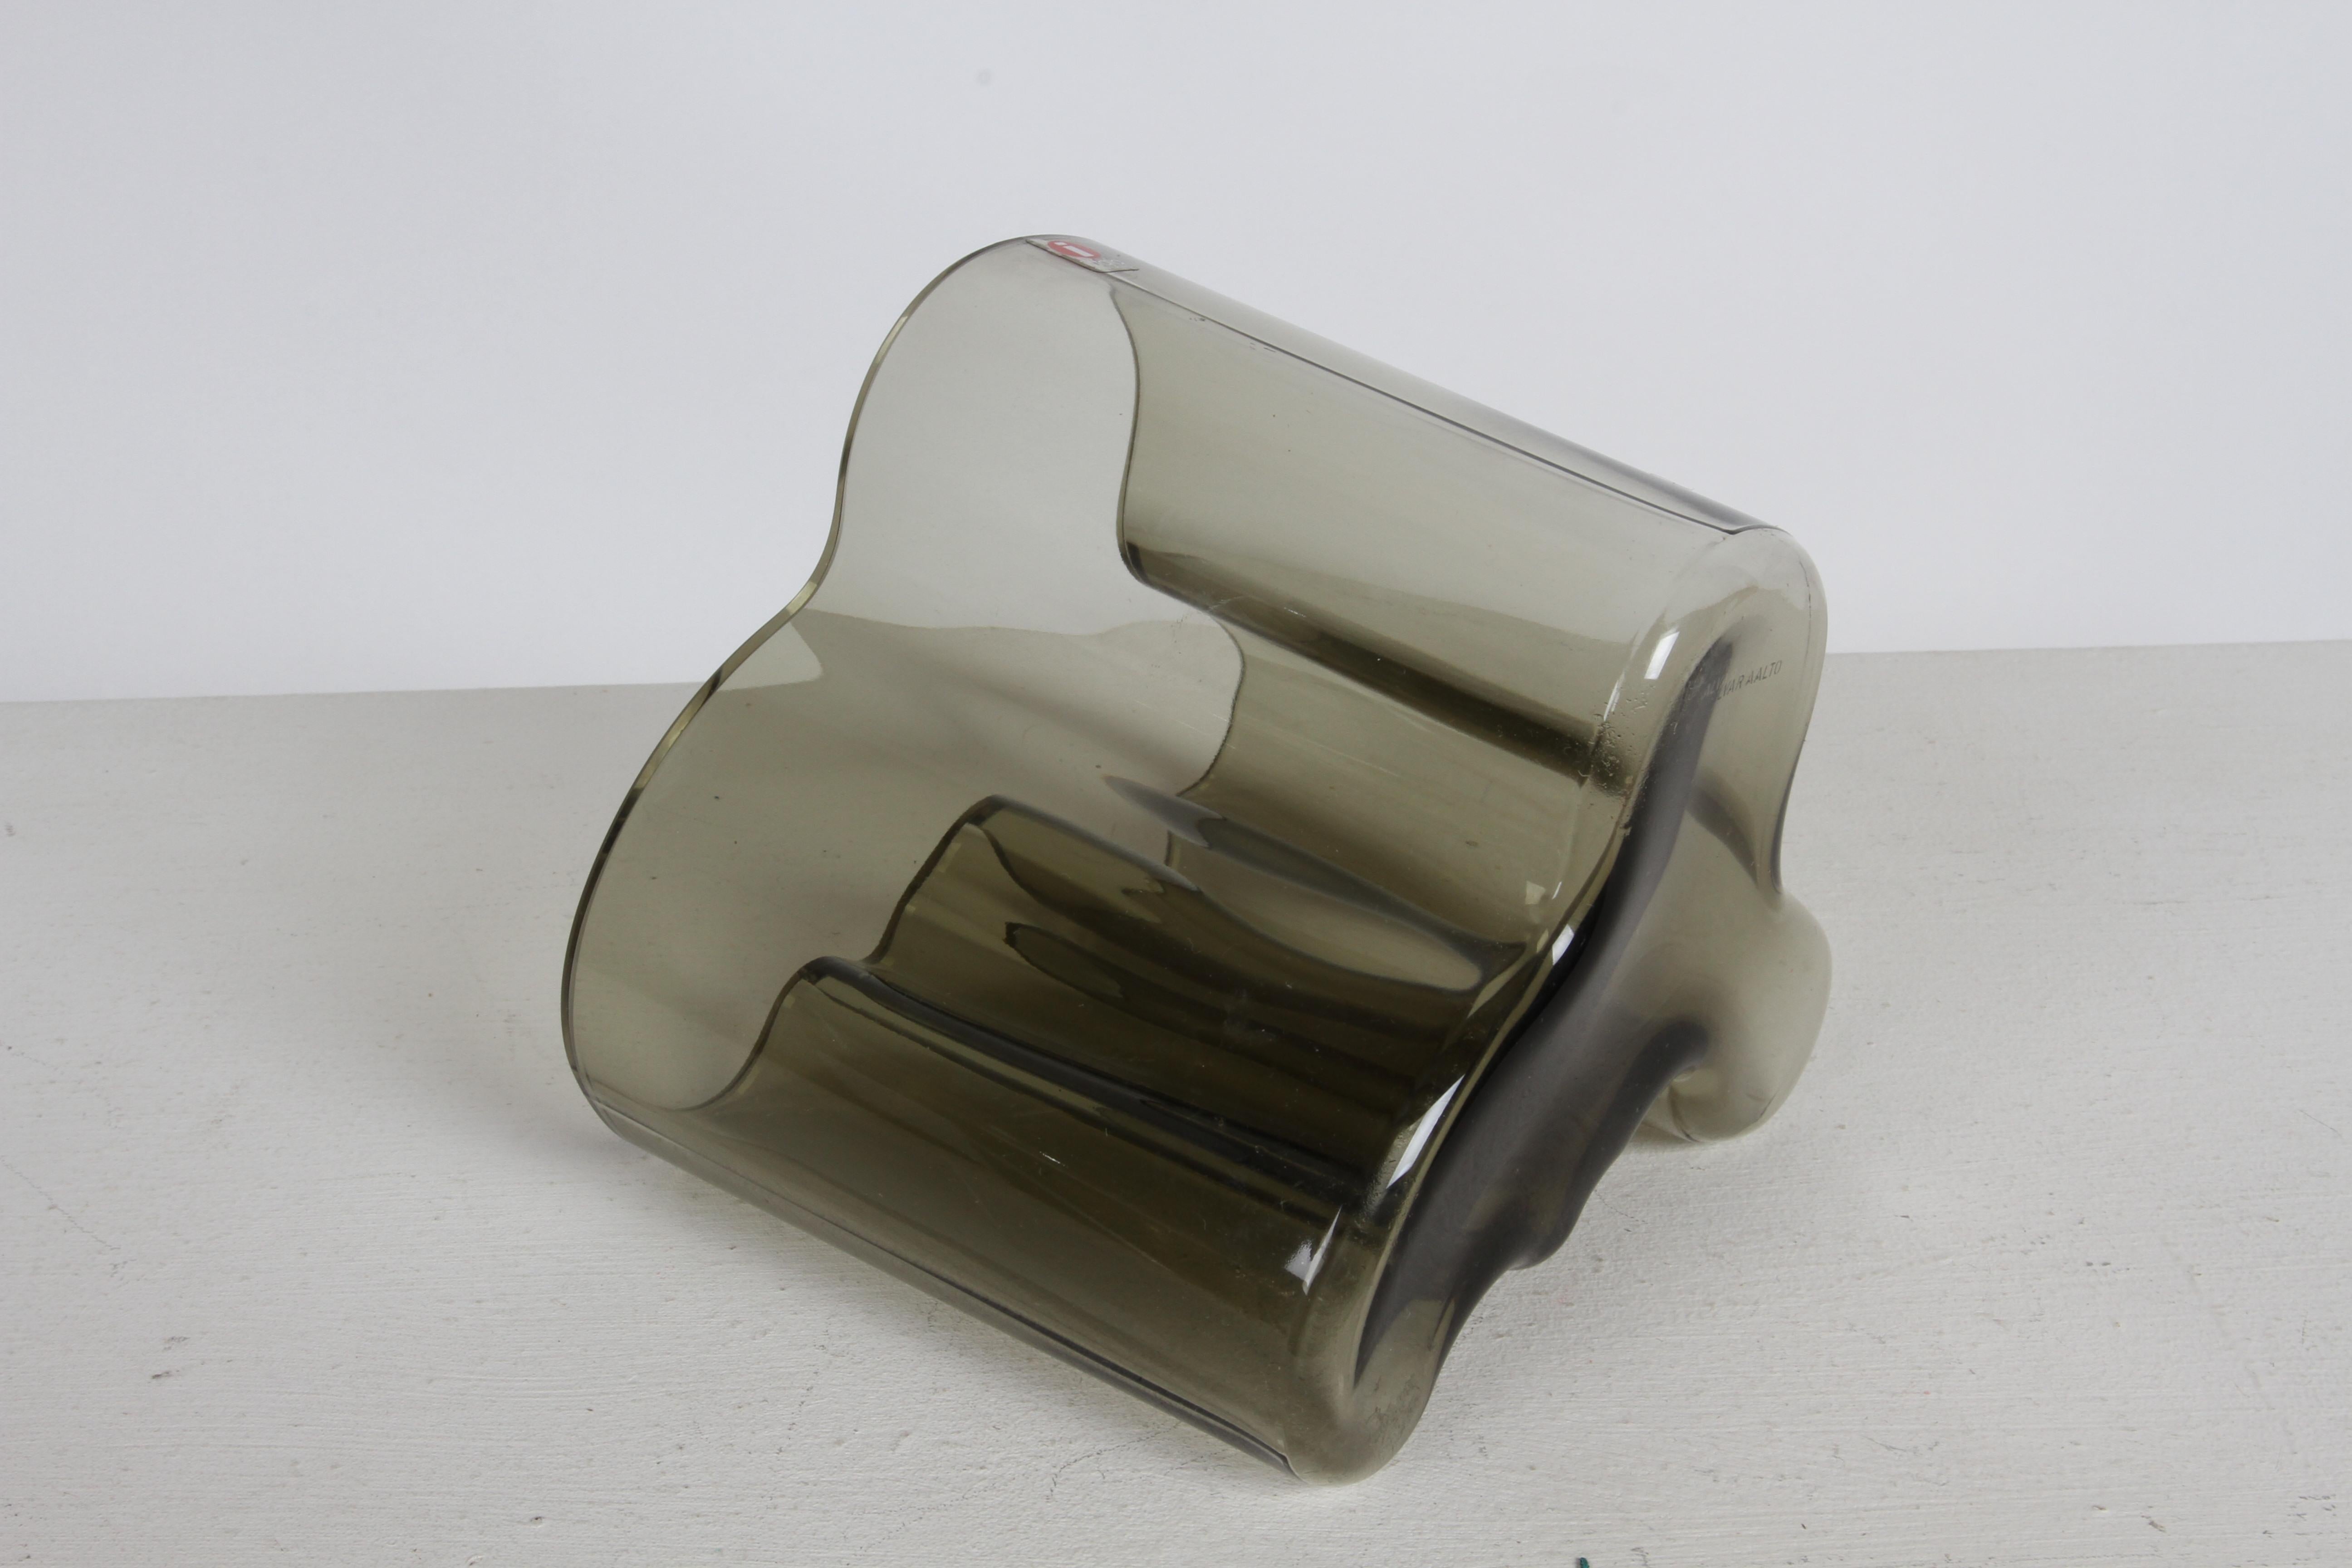 1970s MCM Alvar Aalto Savoy Vase 3030 in Smoke Gray Glass by Iittala Finland For Sale 9